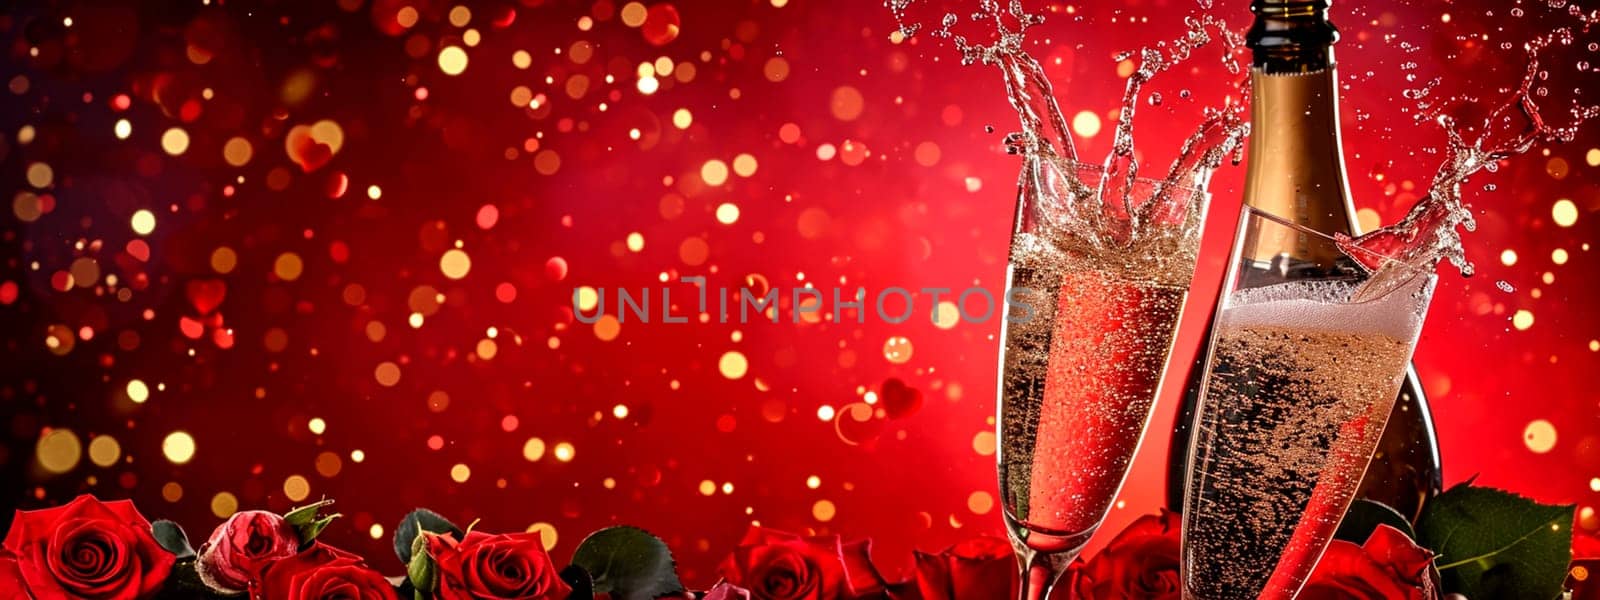 Roses and champagne for Valentine's Day. Selective focus. by yanadjana